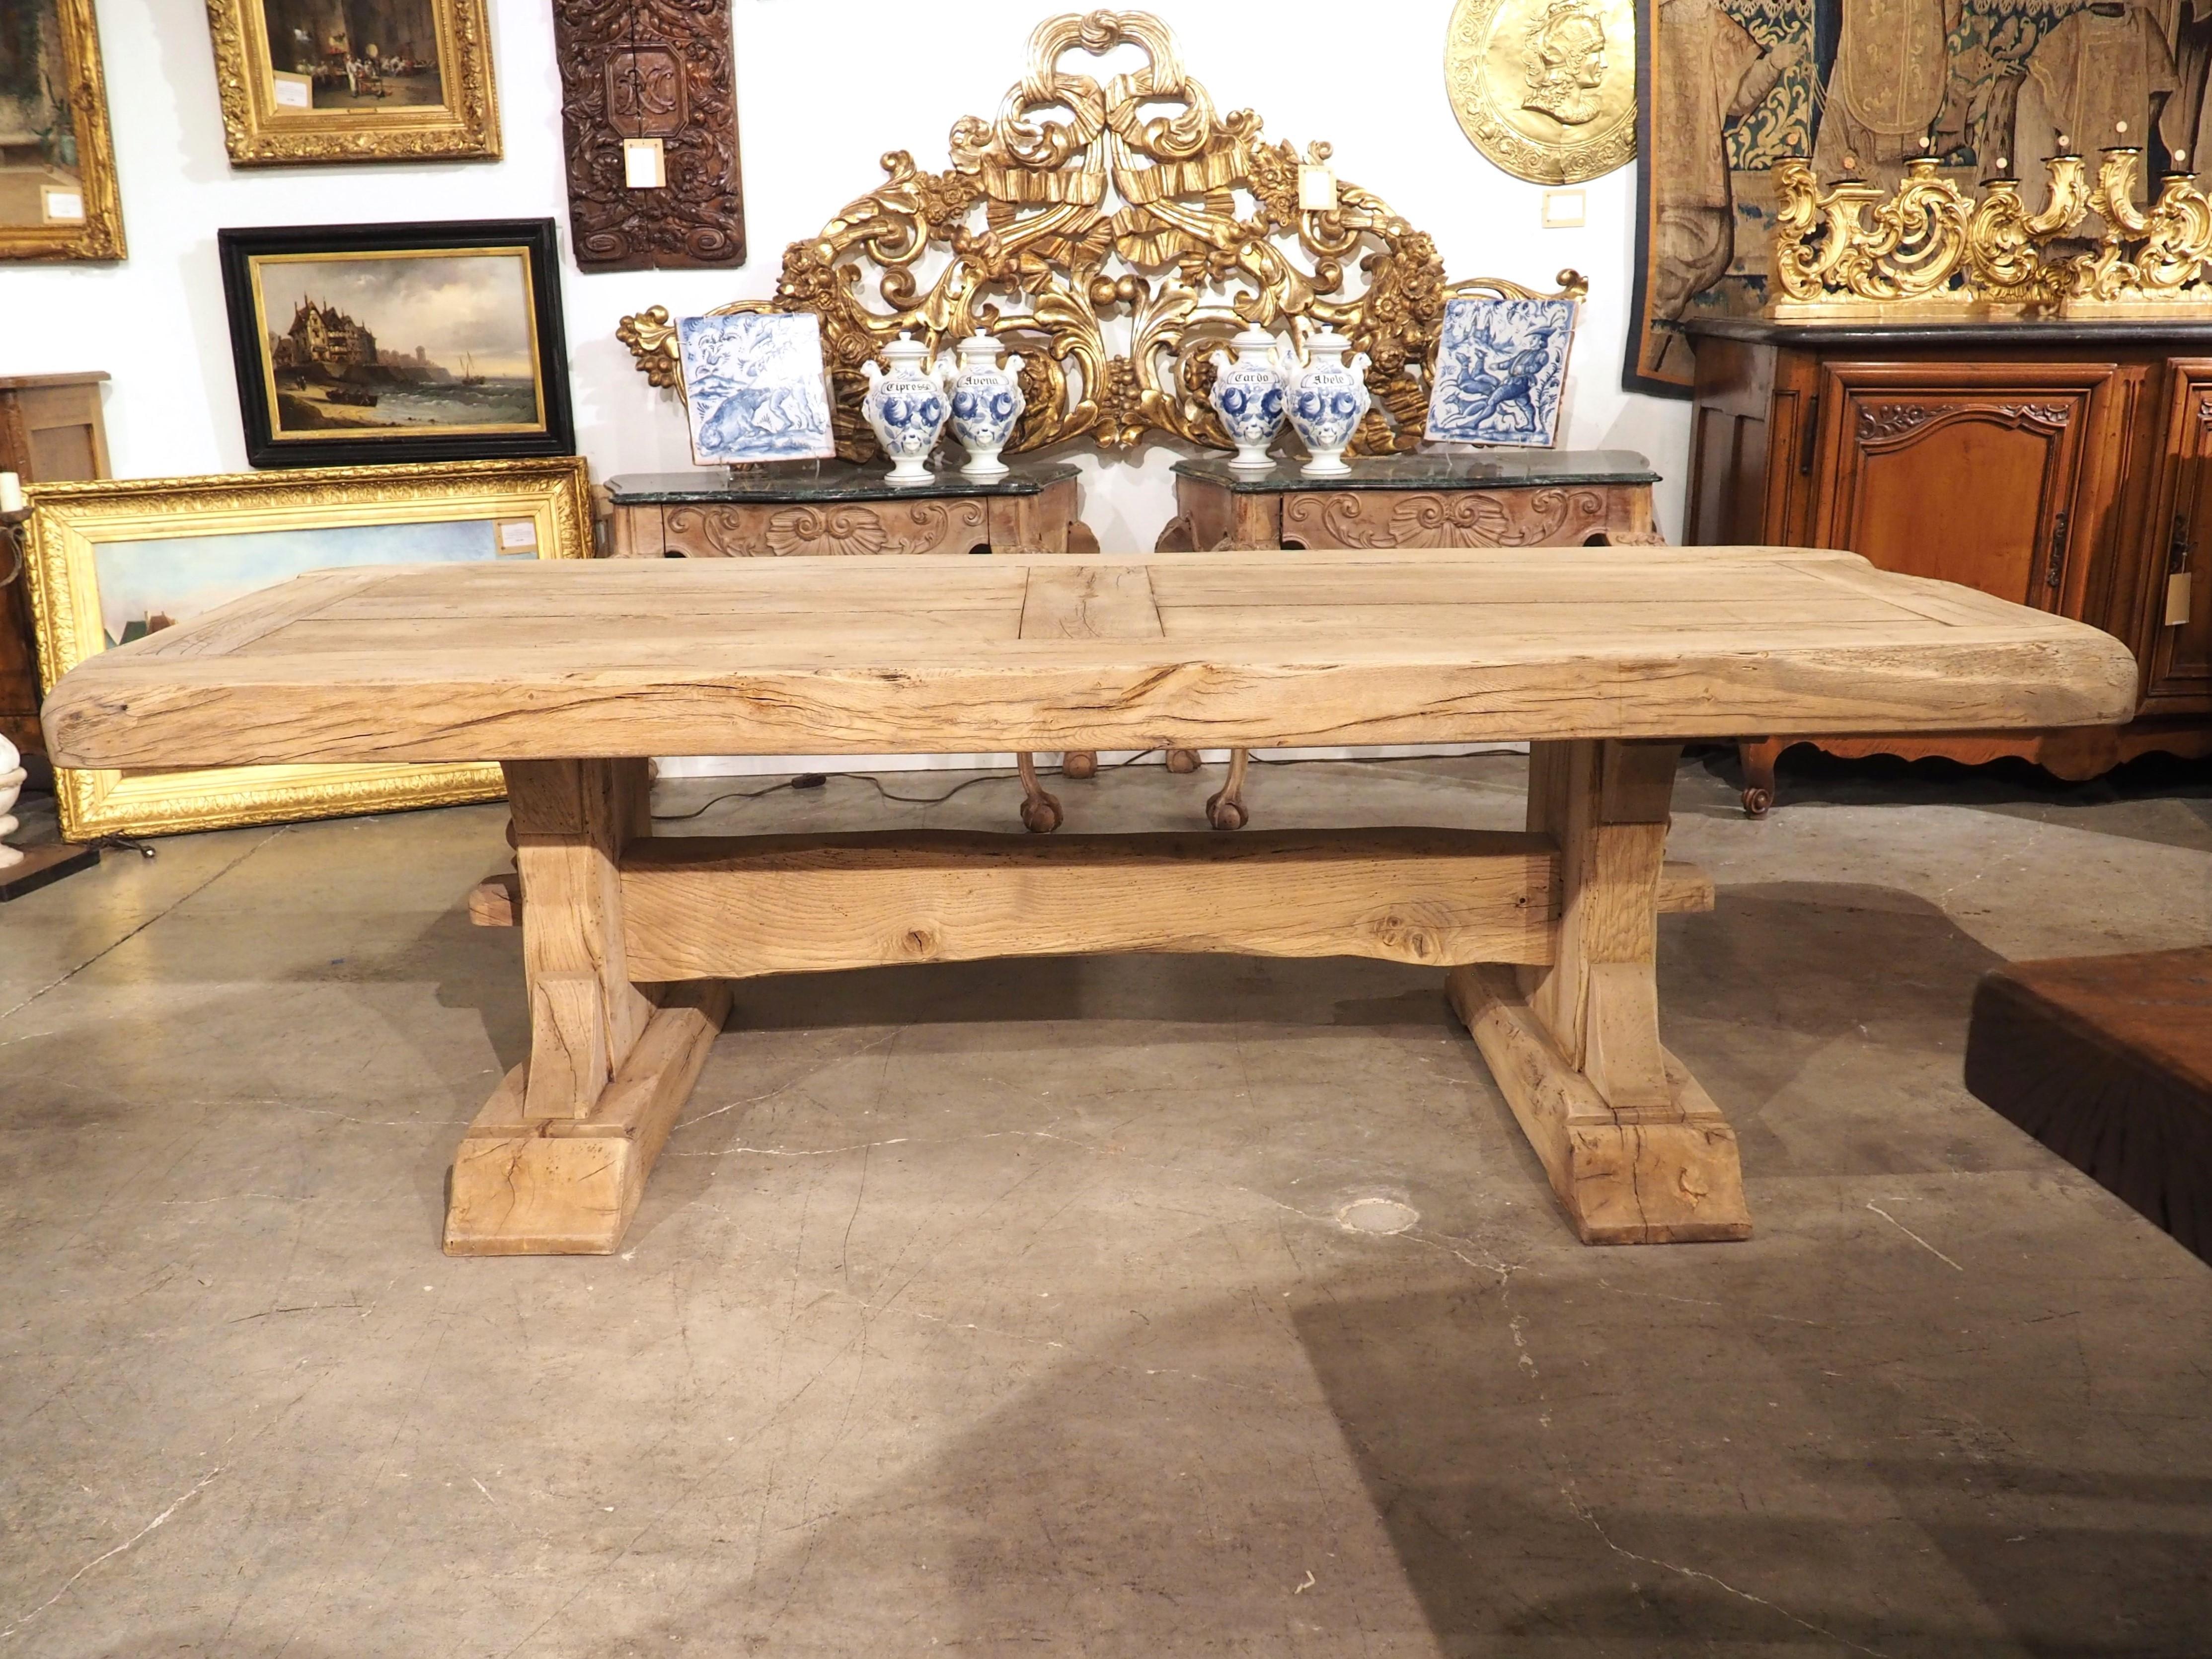 Reminiscent of the robust dining tables used by monks during the Middle Ages, this oak monastery table was hand-carved from oak in France, circa 1950. Our magnificent table exudes character, boasting a substantial four-inch thick top, with